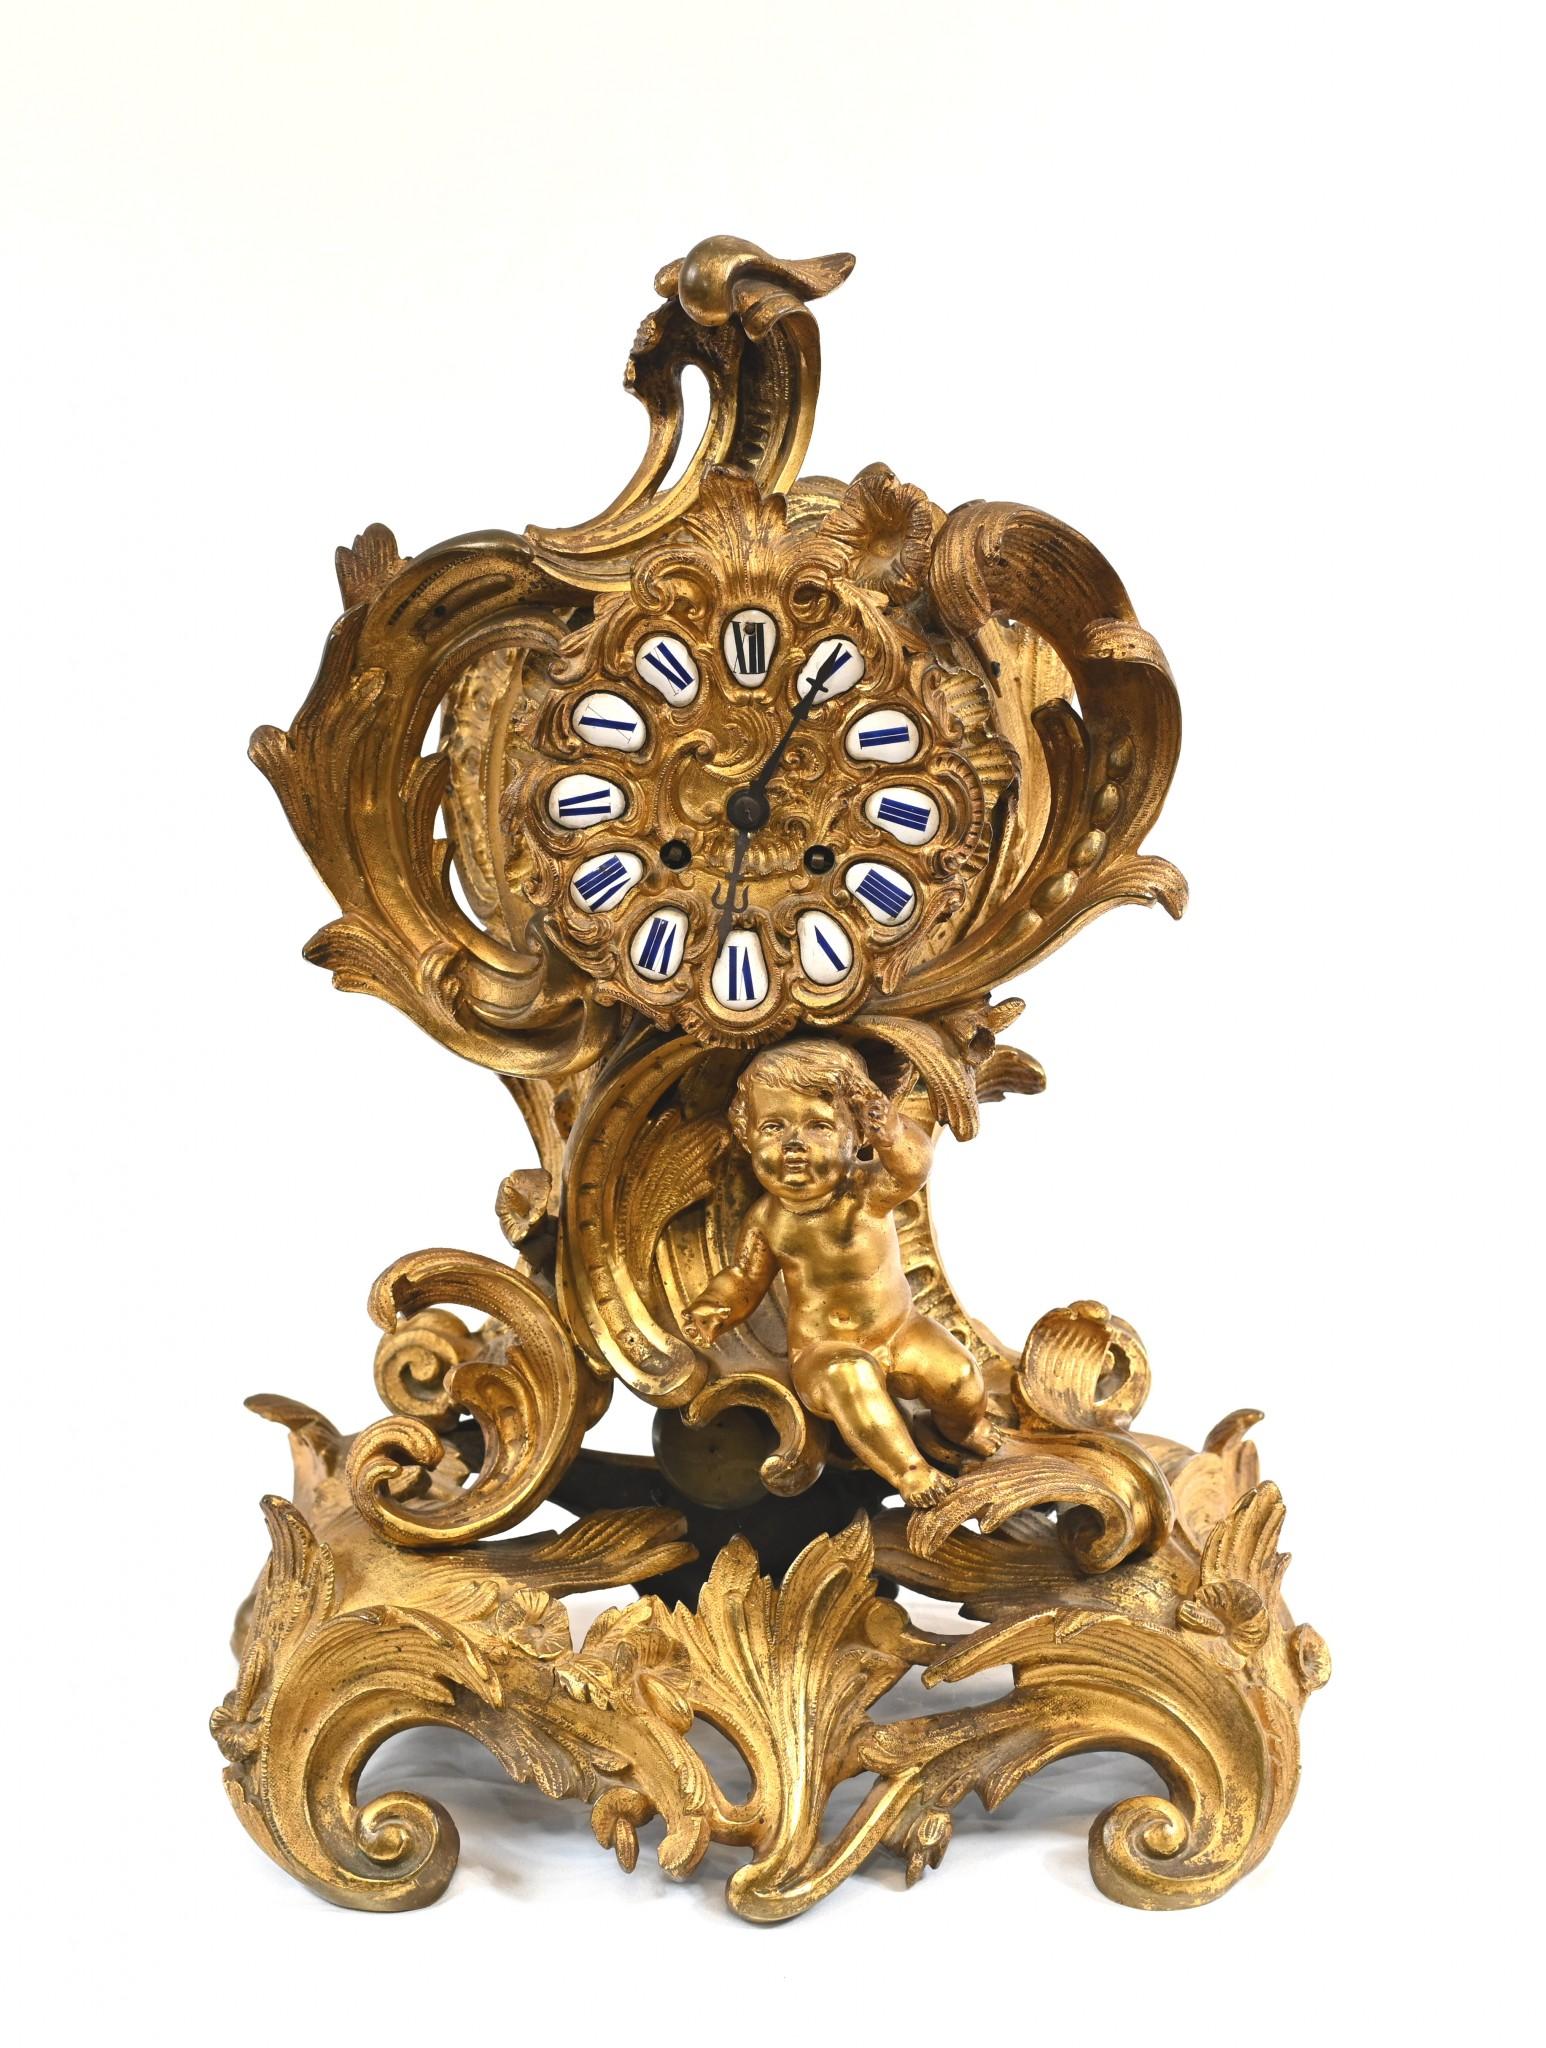 An unusual French ormolu rococo style mantle clock.
The hours on the clock face are represented in Roman numerals in enamel.
Glorious patina to the gilt, look at details like the cherub.
Great collectable clock
Purchased from a dealer on Rue de